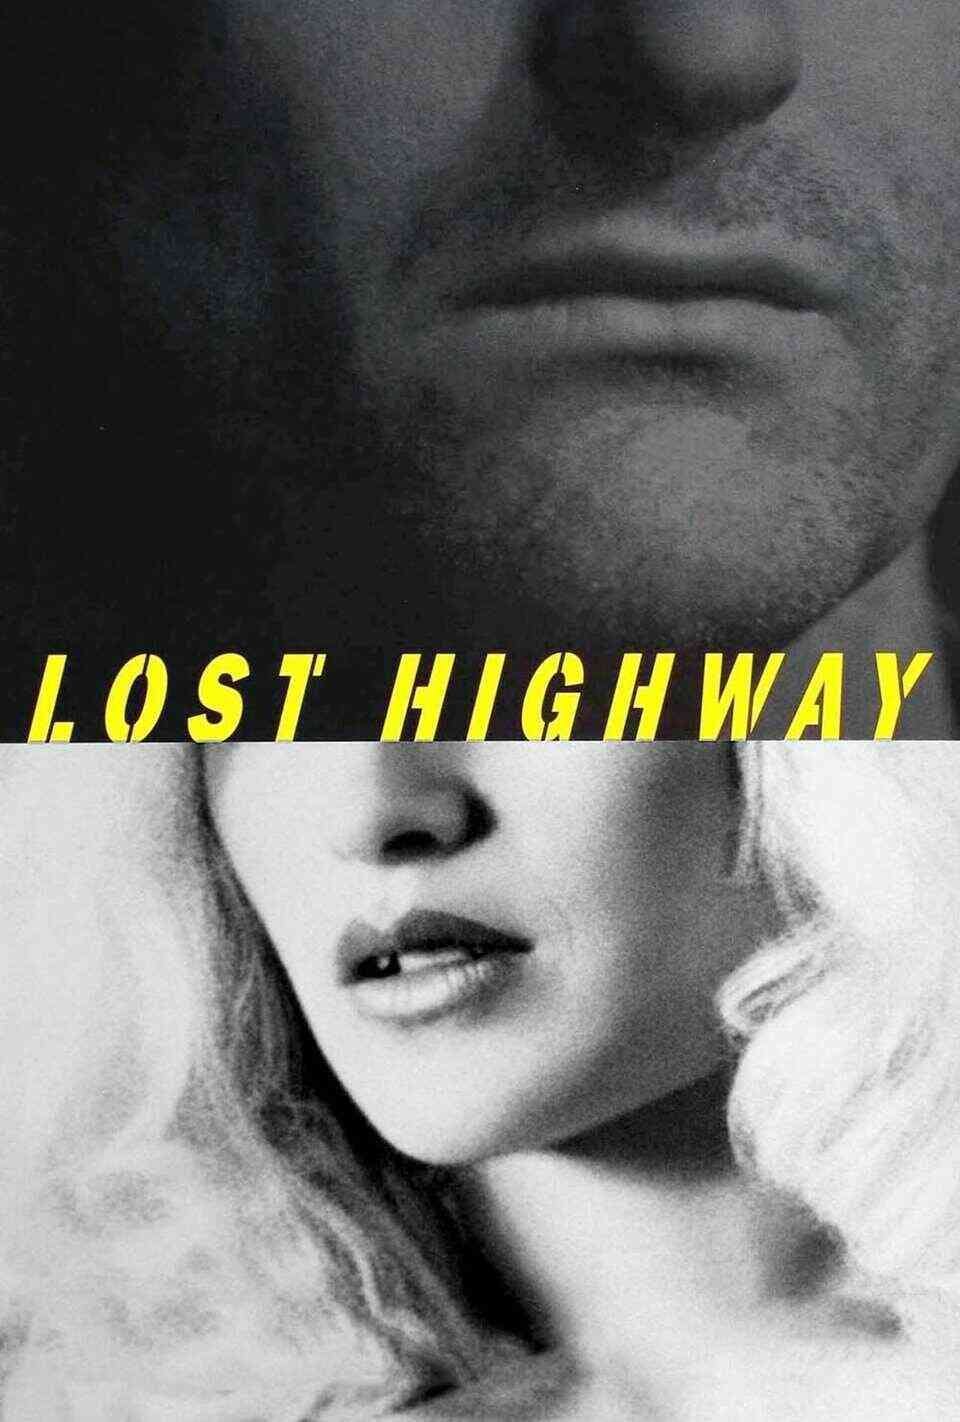 Read Lost Highway screenplay (poster)